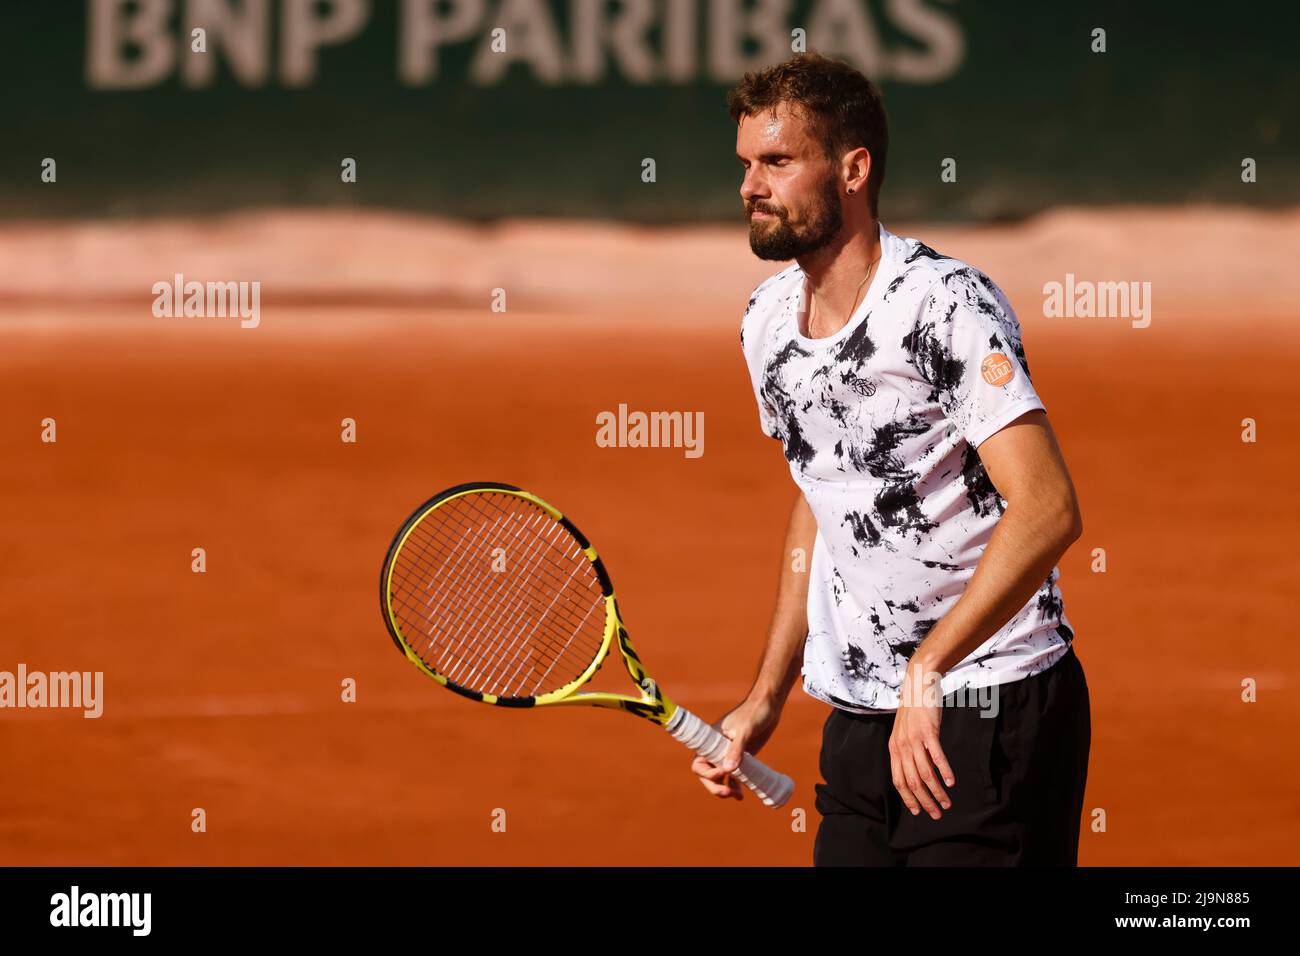 Paris, France. 24th May, 2022. Tennis: Grand Slam/ATP Tour - French Open,  men's singles, 1st round, Carballes Baena (Spain) - Otte (Germany). Oscar  Otte is in action. Credit: Frank Molter/dpa/Alamy Live News